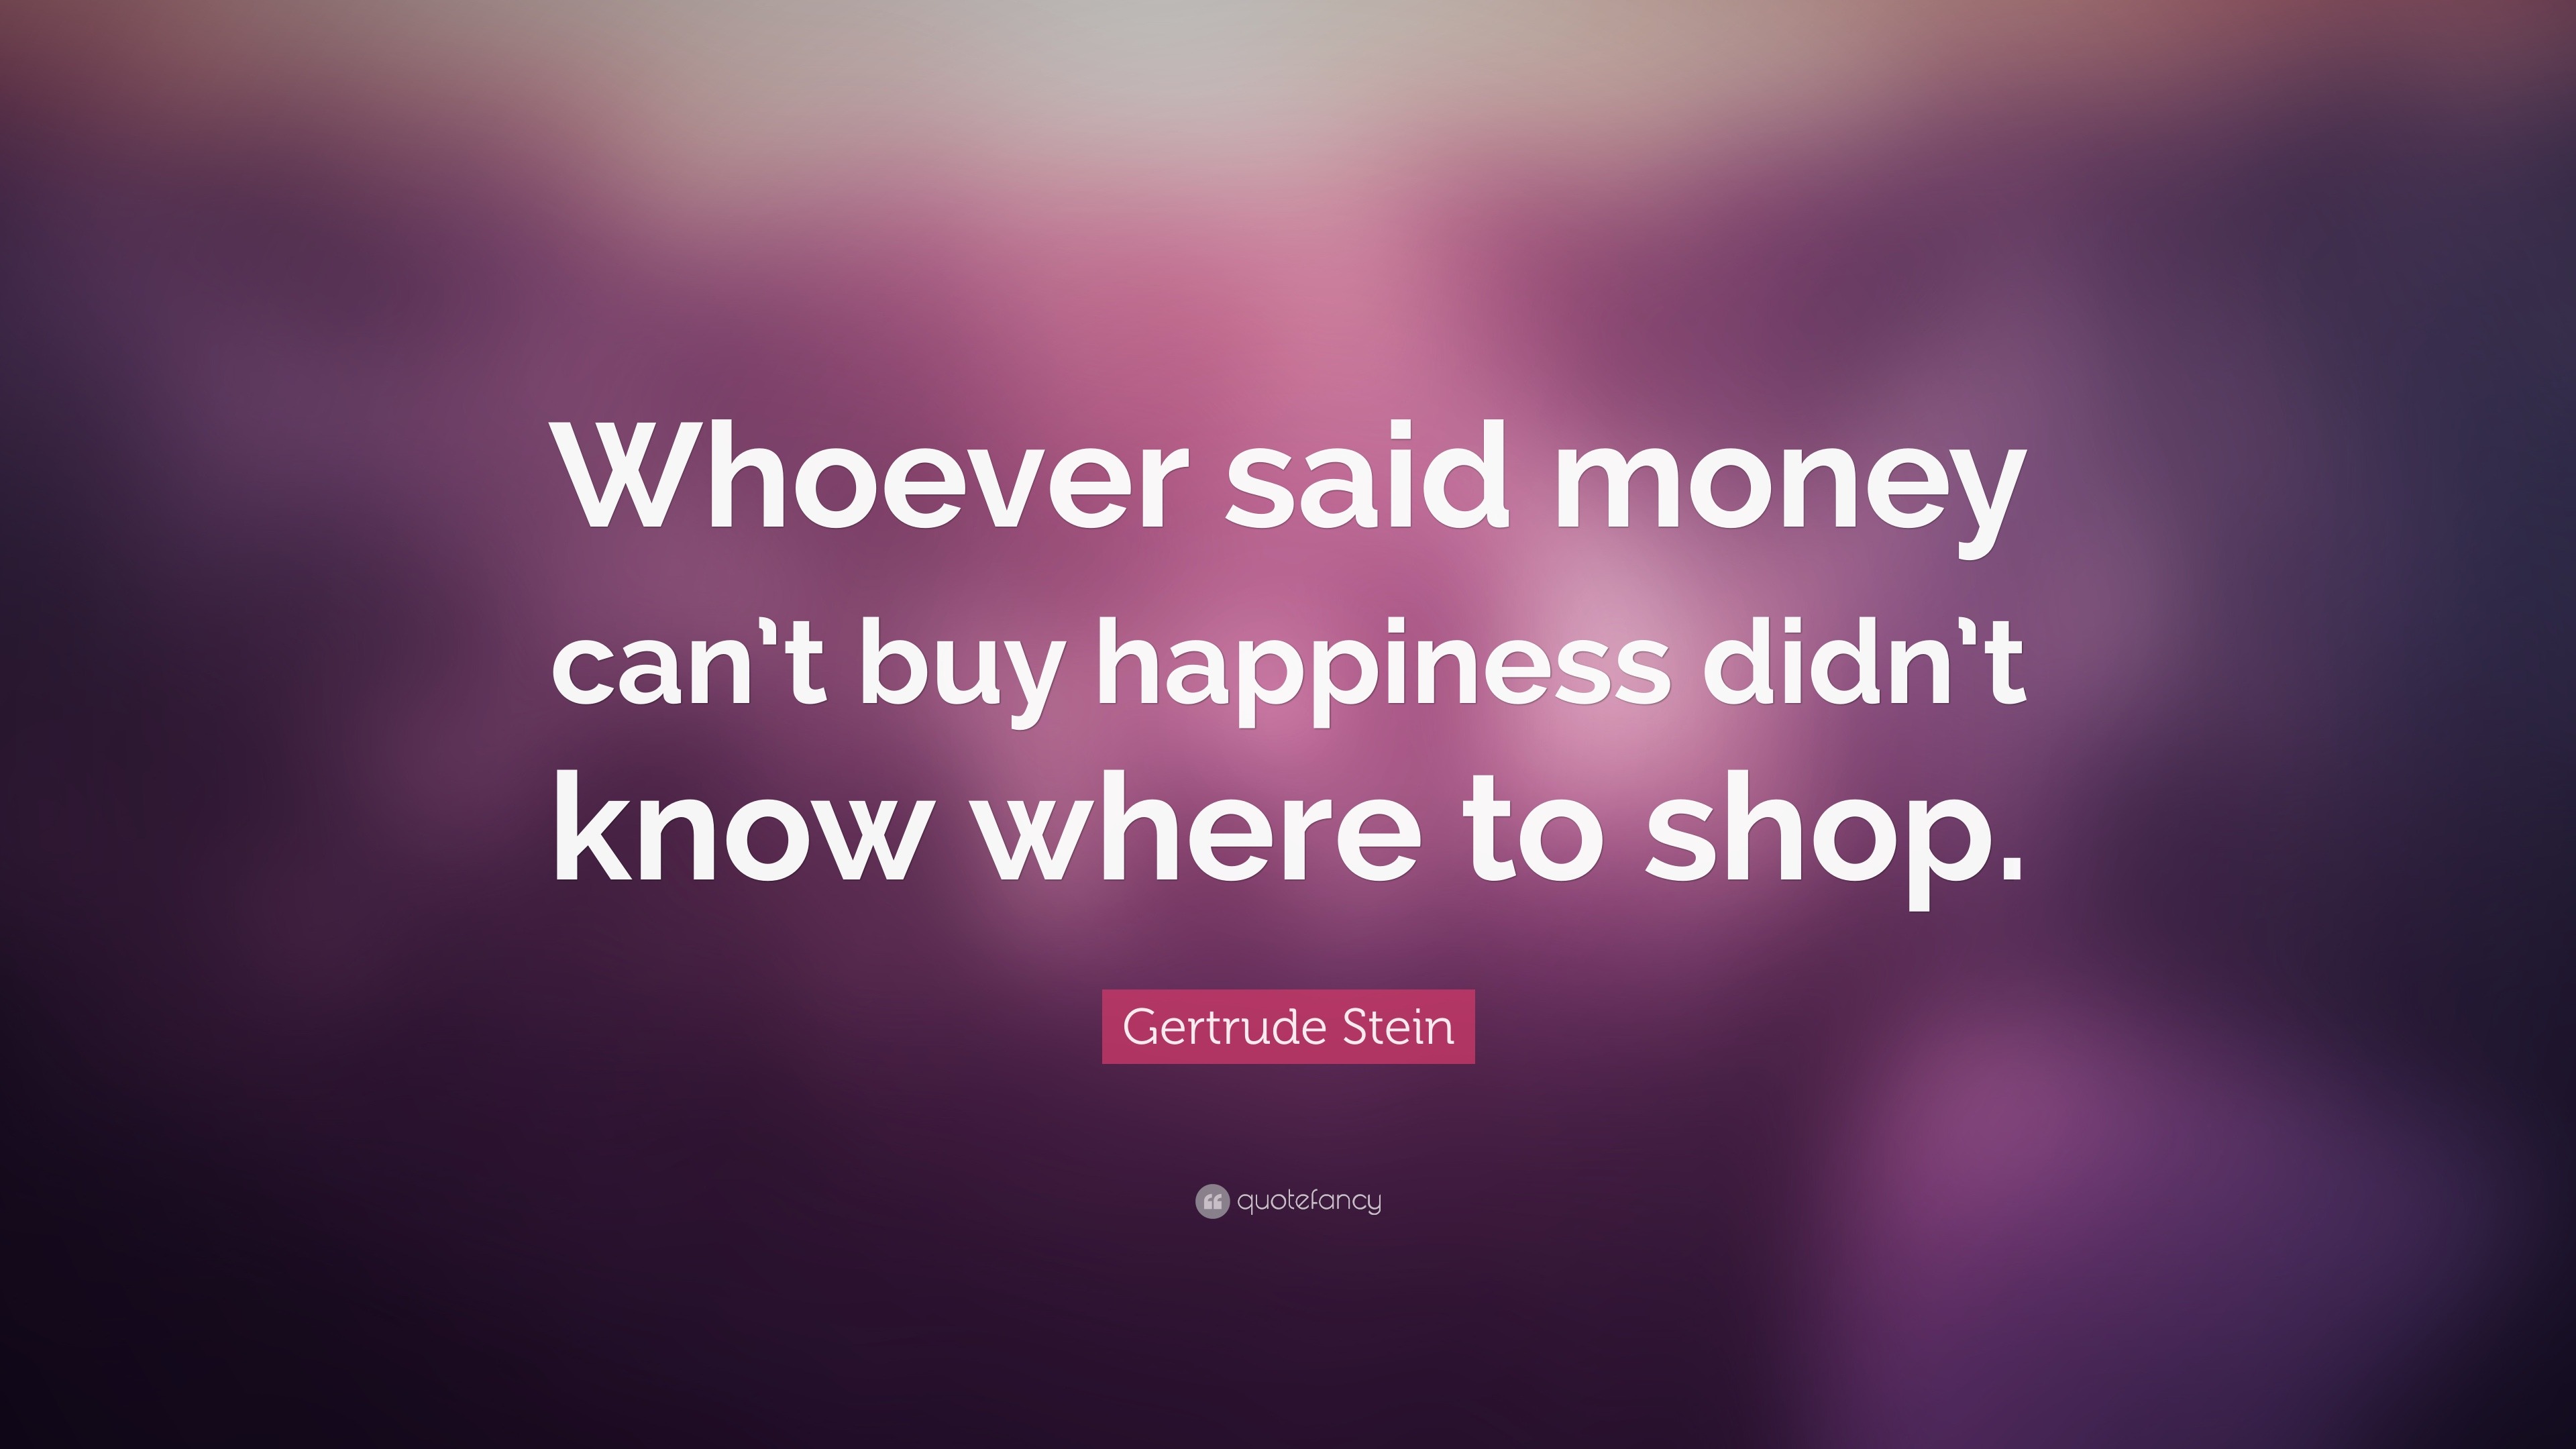 Gertrude Stein Quote Whoever Said Money Can T Buy Happiness Didn T - gertrude stein quote whoever said money can t buy happiness didn t